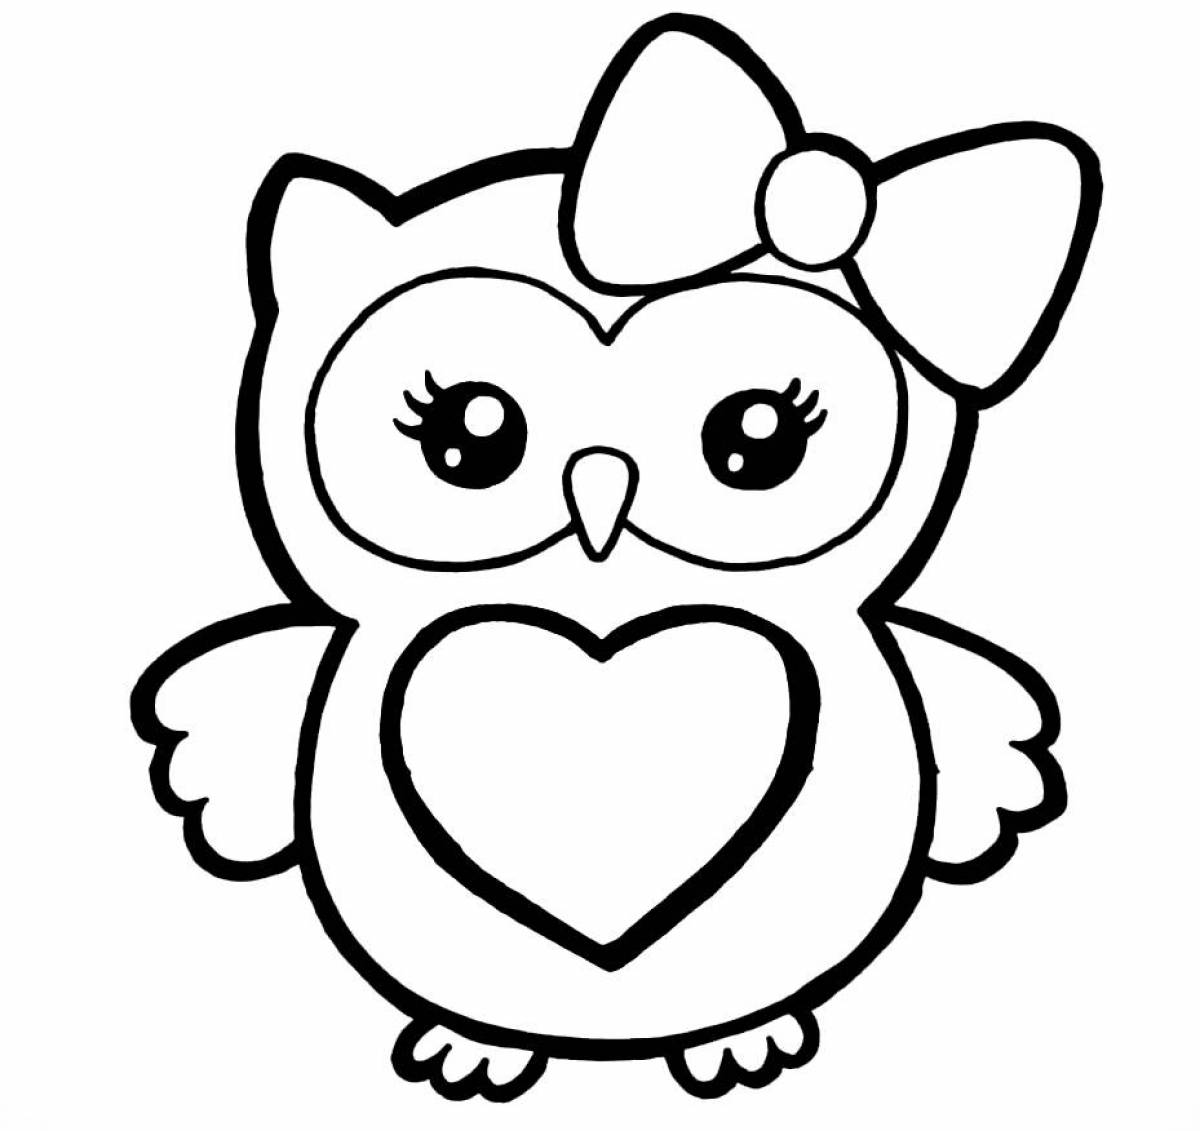 Naughty owl coloring book